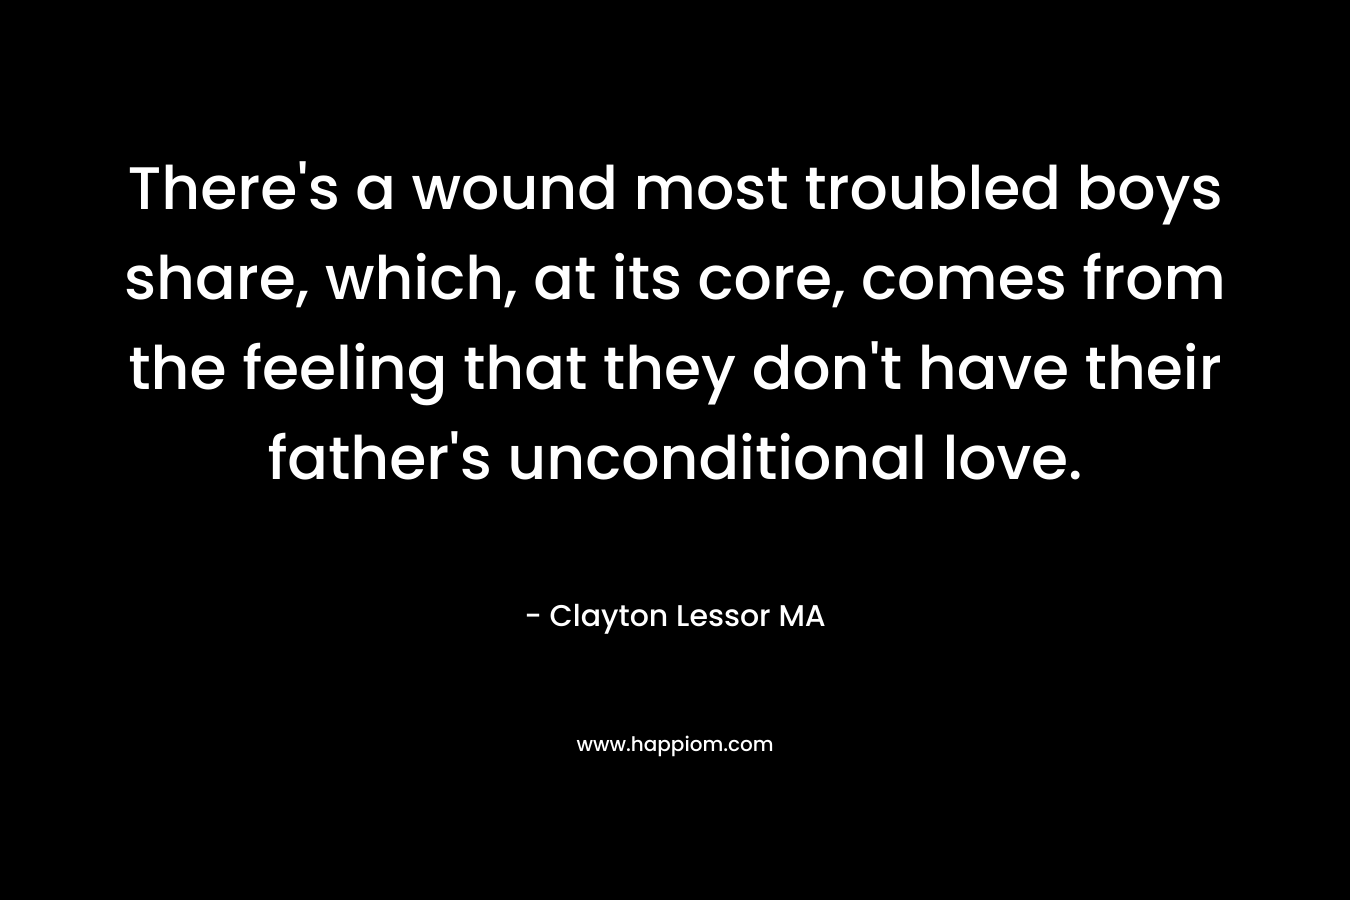 There's a wound most troubled boys share, which, at its core, comes from the feeling that they don't have their father's unconditional love.